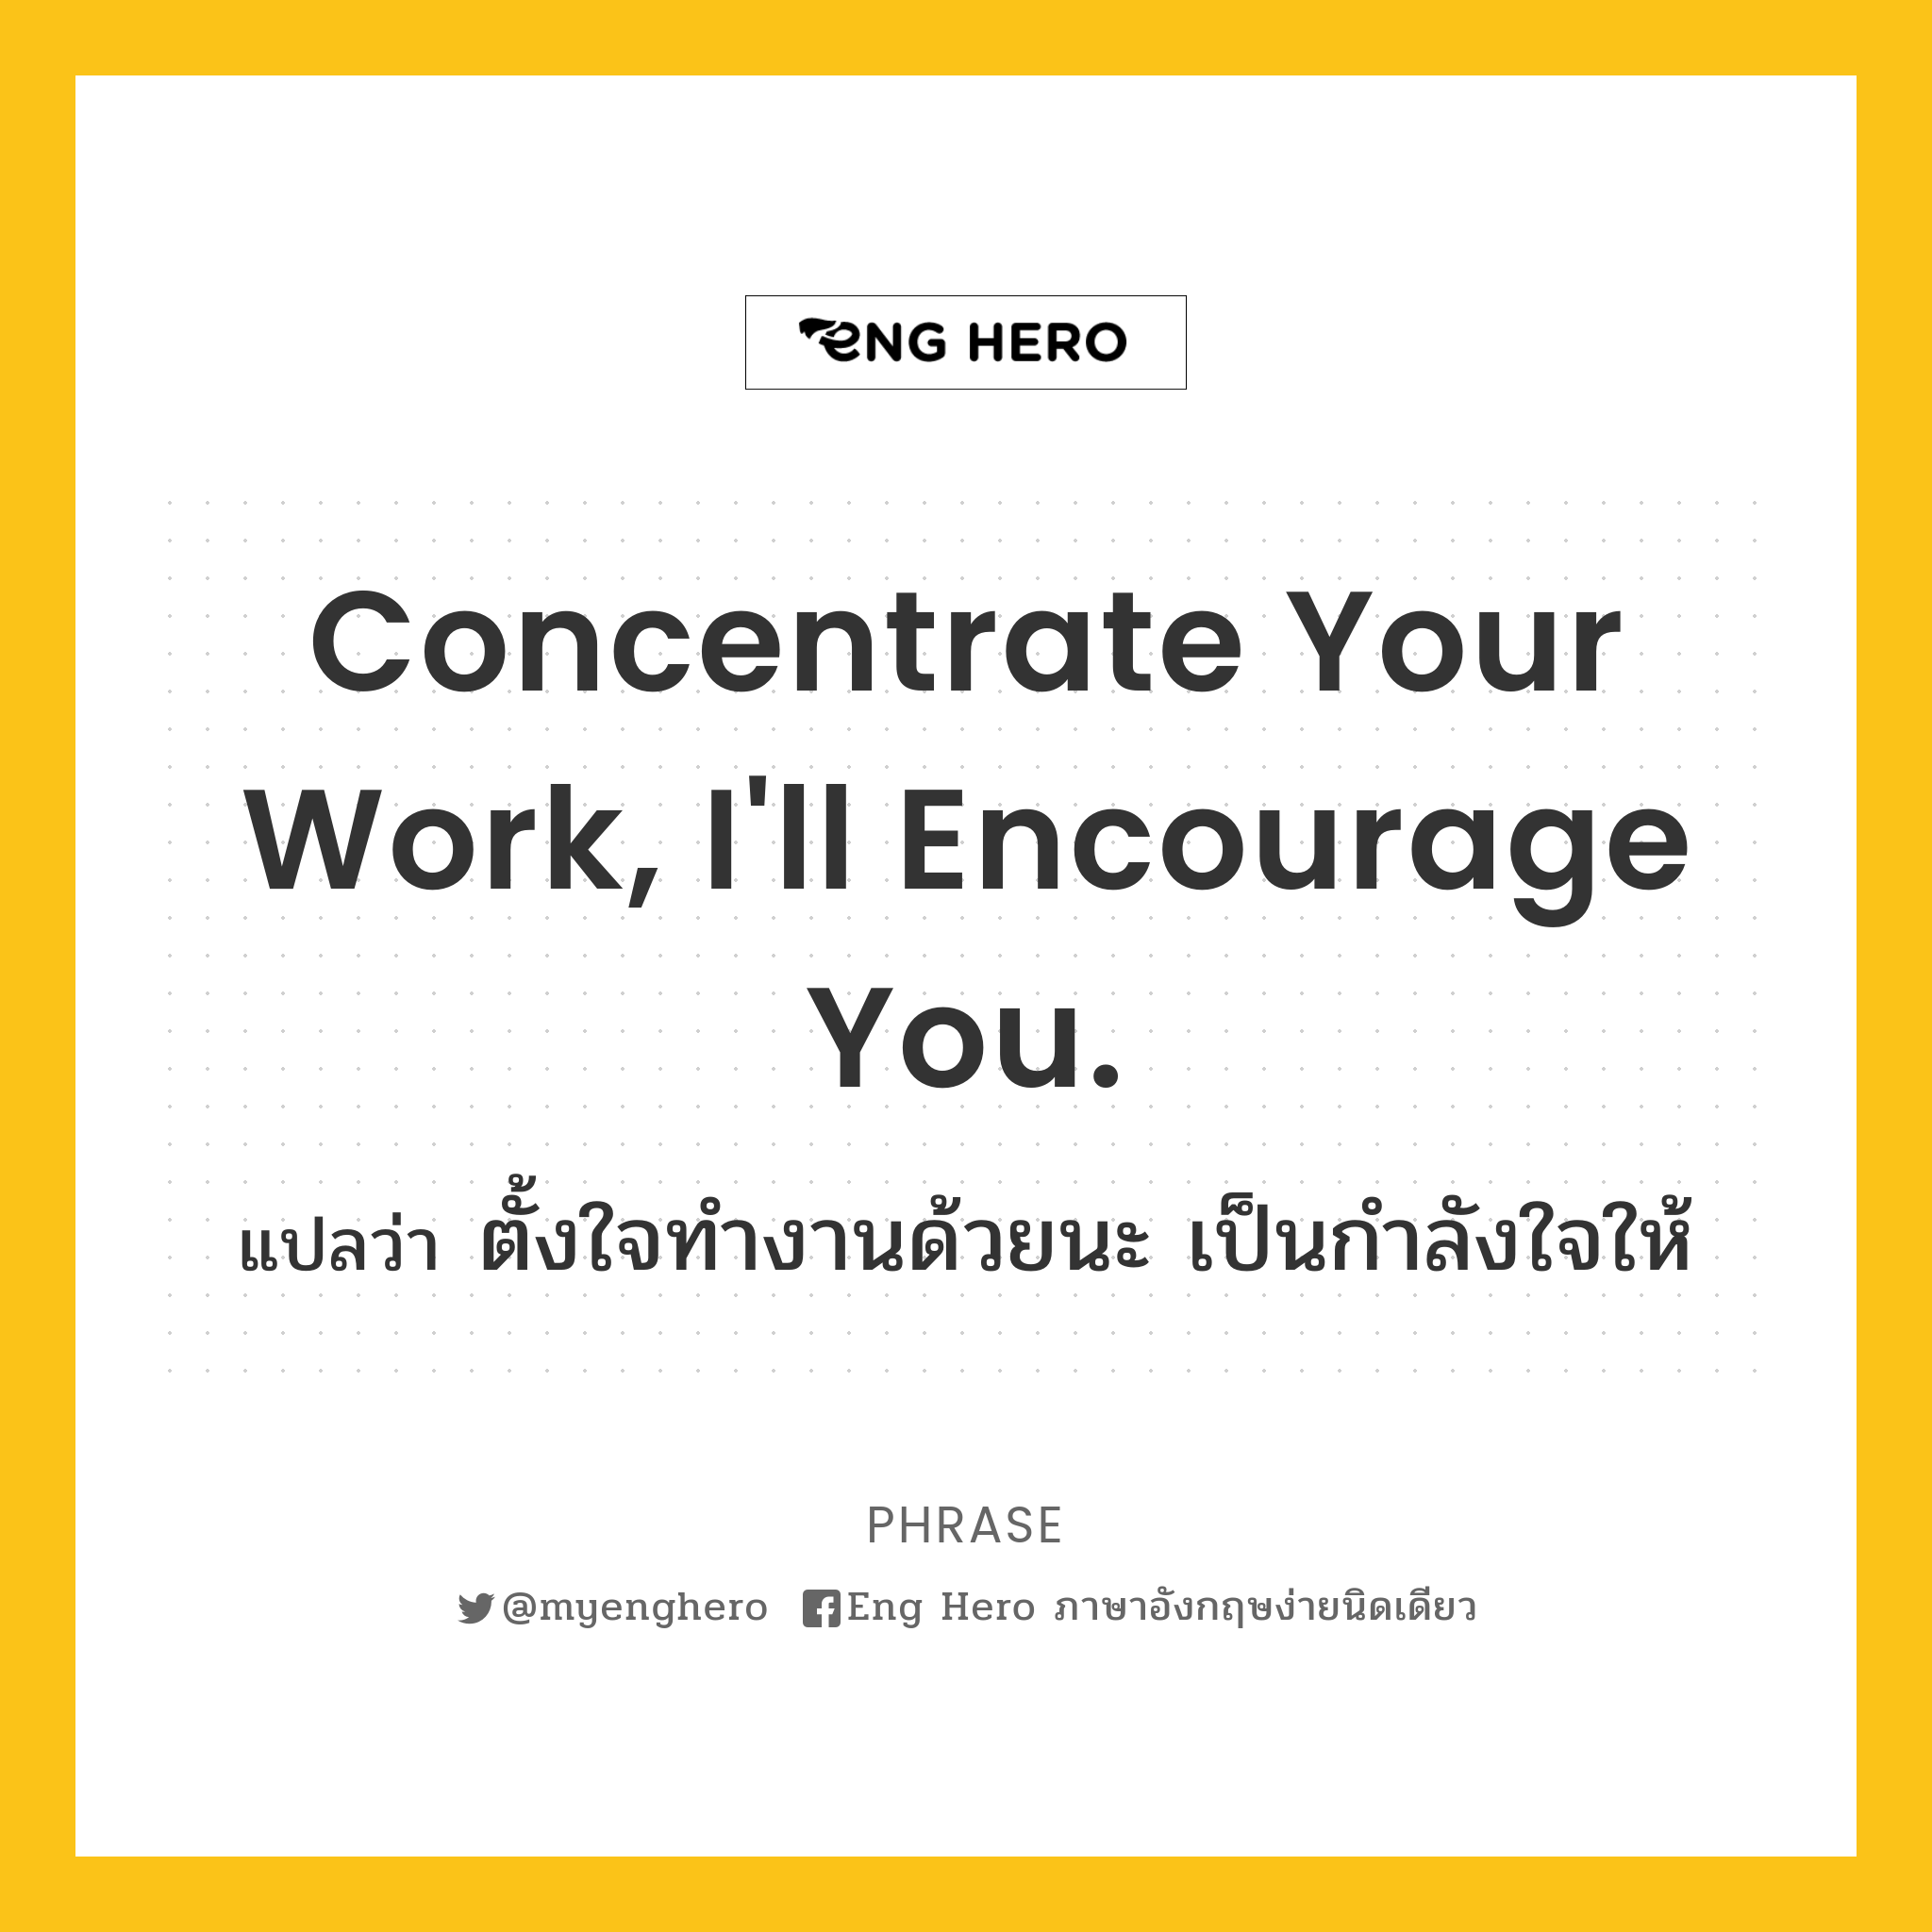 Concentrate your work, I'll encourage you.